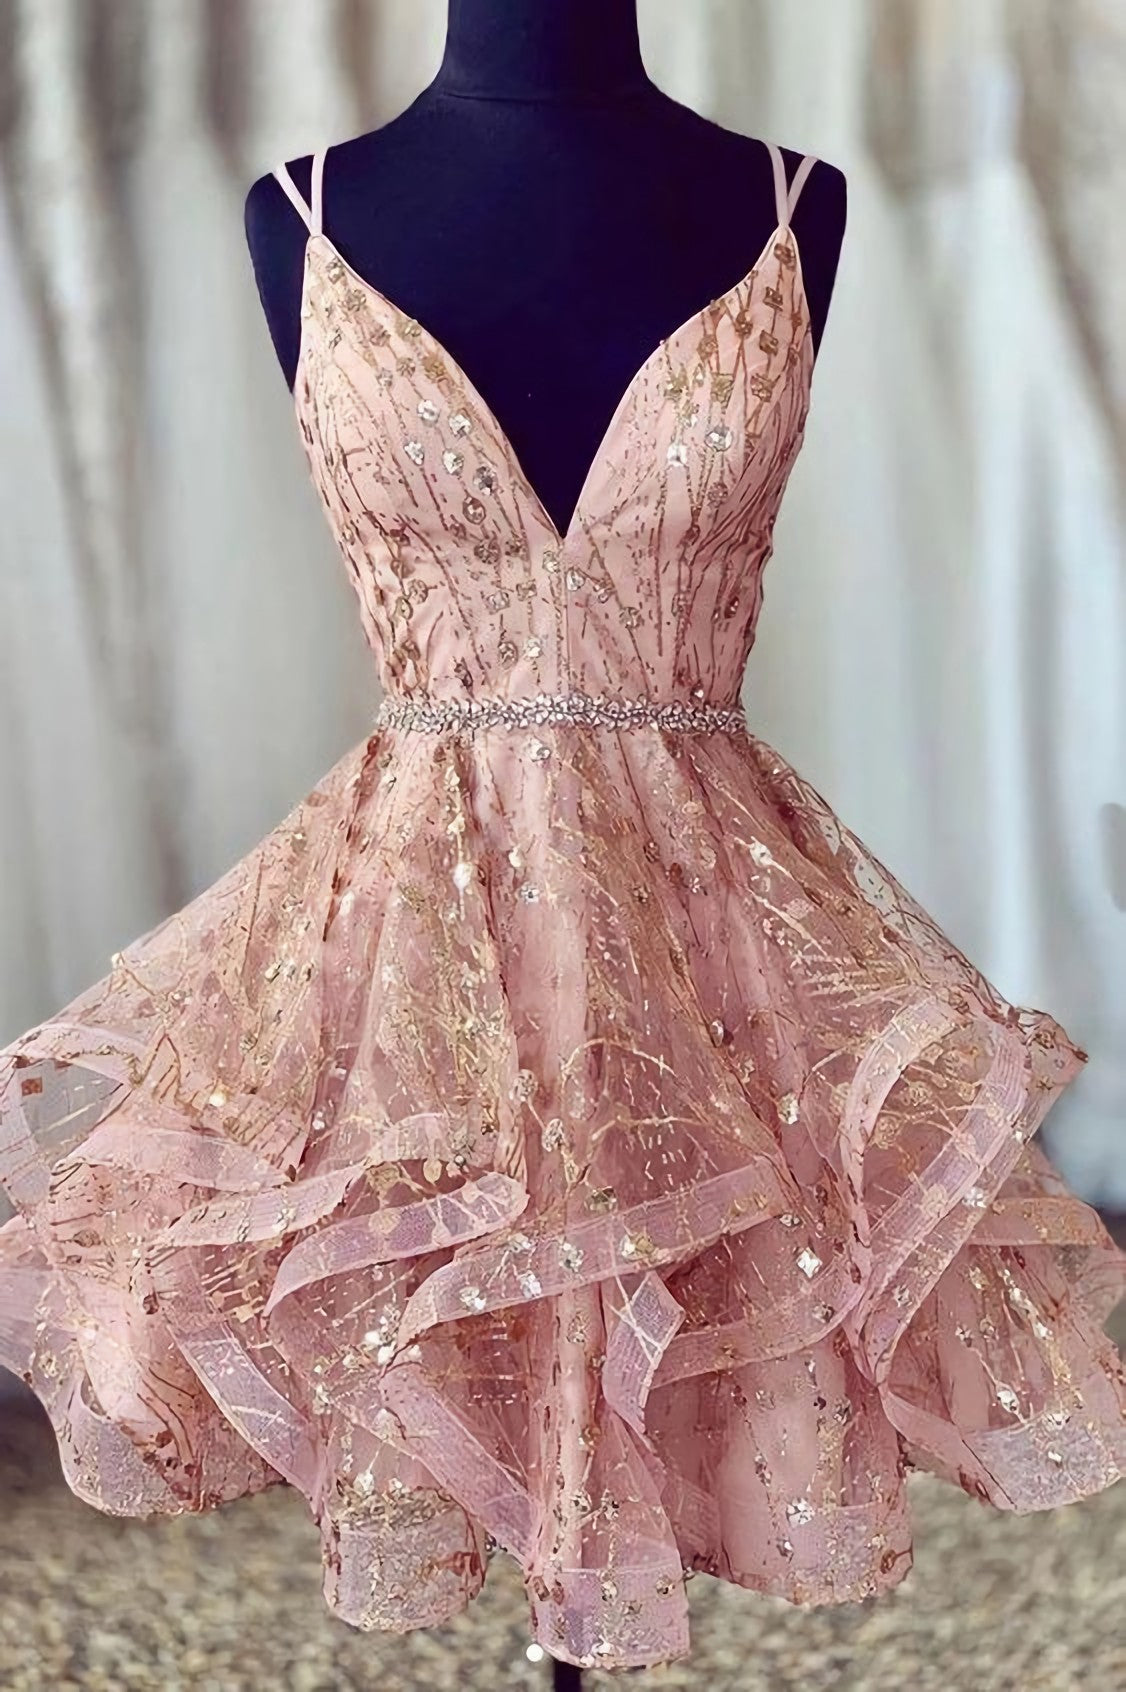 Party Dress Halter Neck, Cheap A Line Spaghetti Straps Lace Up V Neck Pink Homecoming Dress, With Sequins